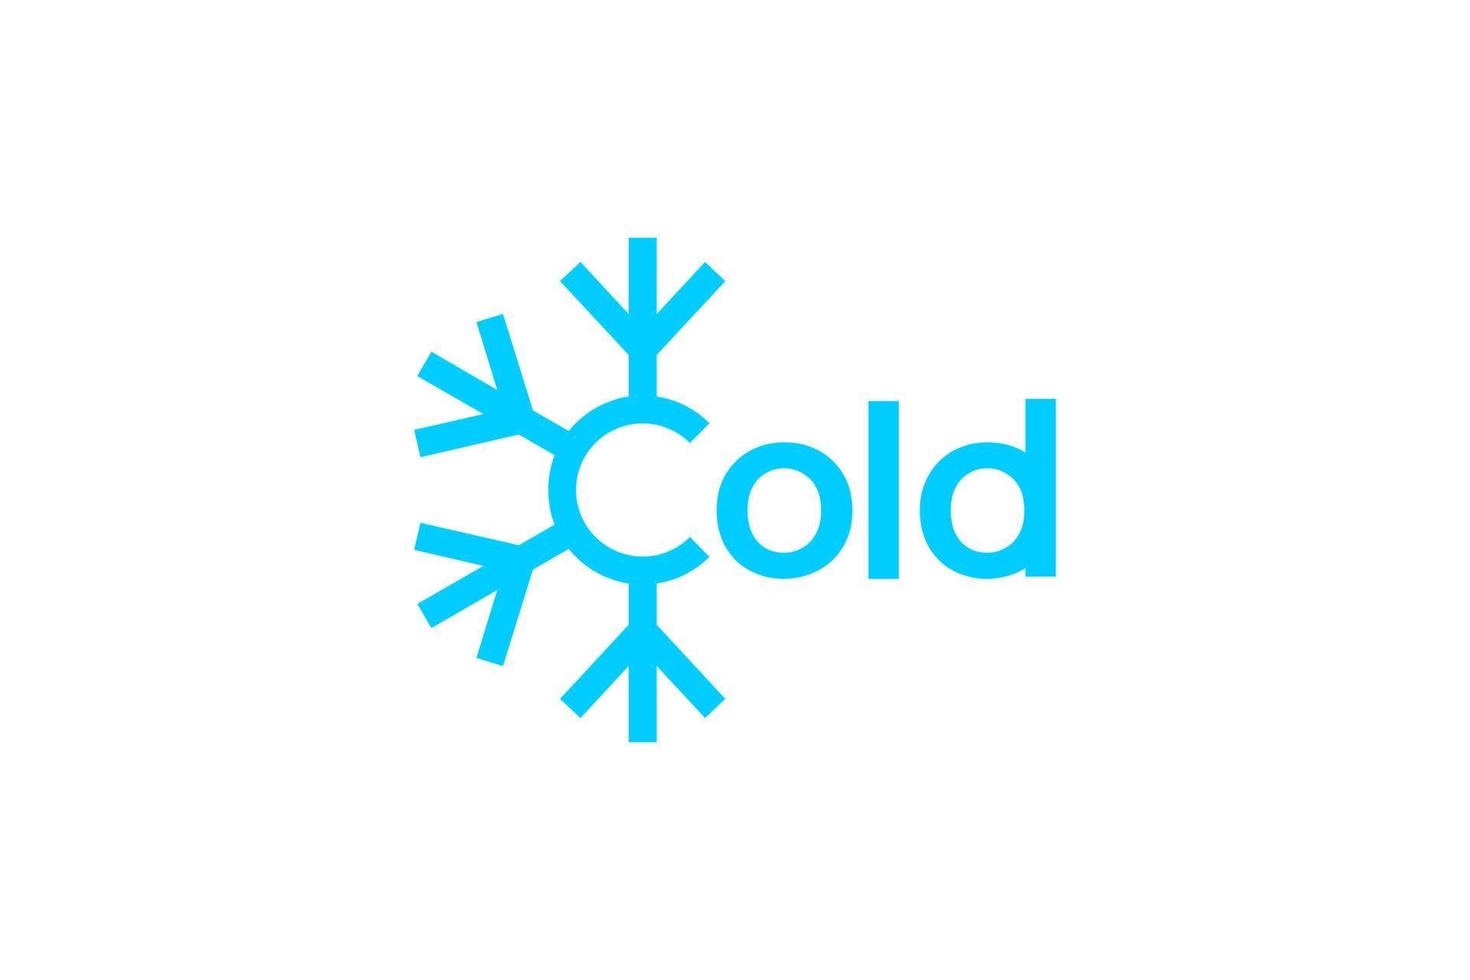 c cold with snow logo template vector